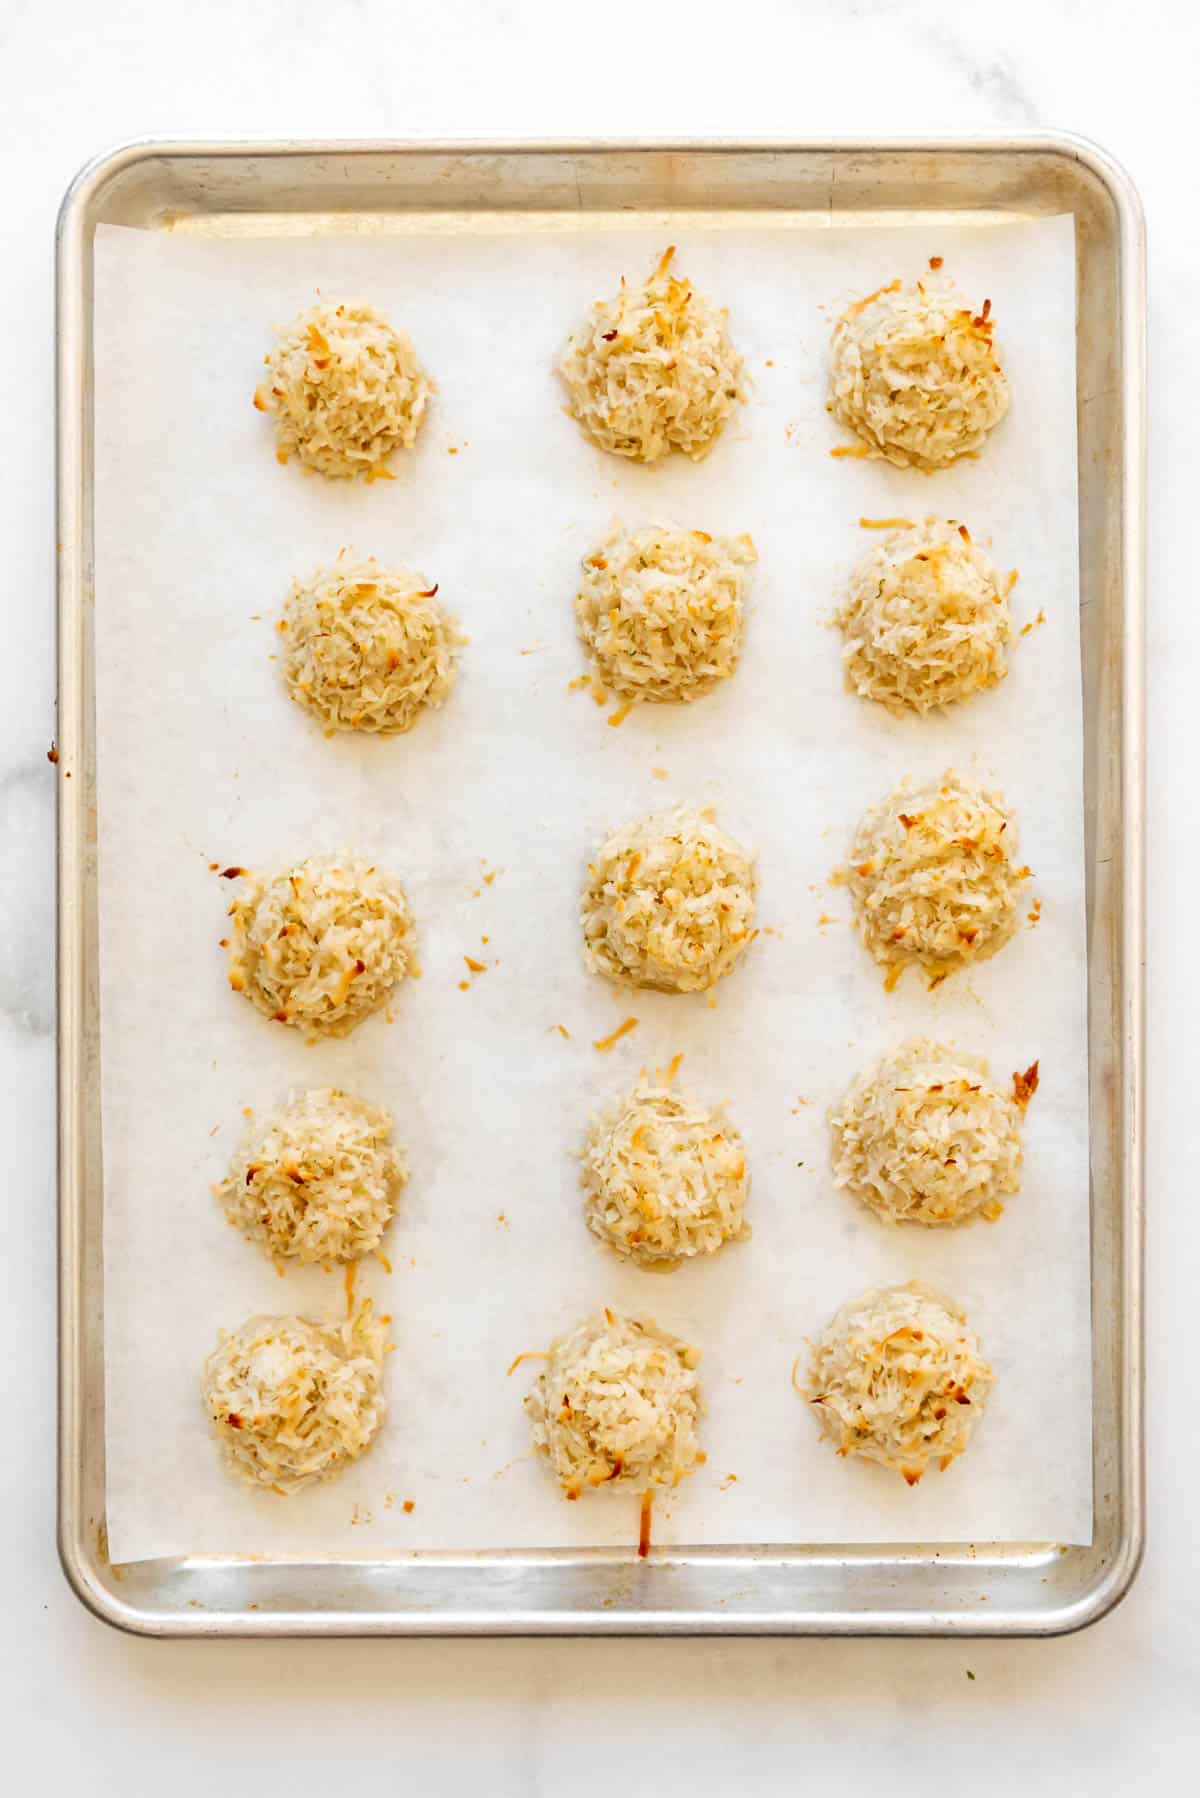 Baked coconut lime macarons on a baking sheet lined with parchment paper.